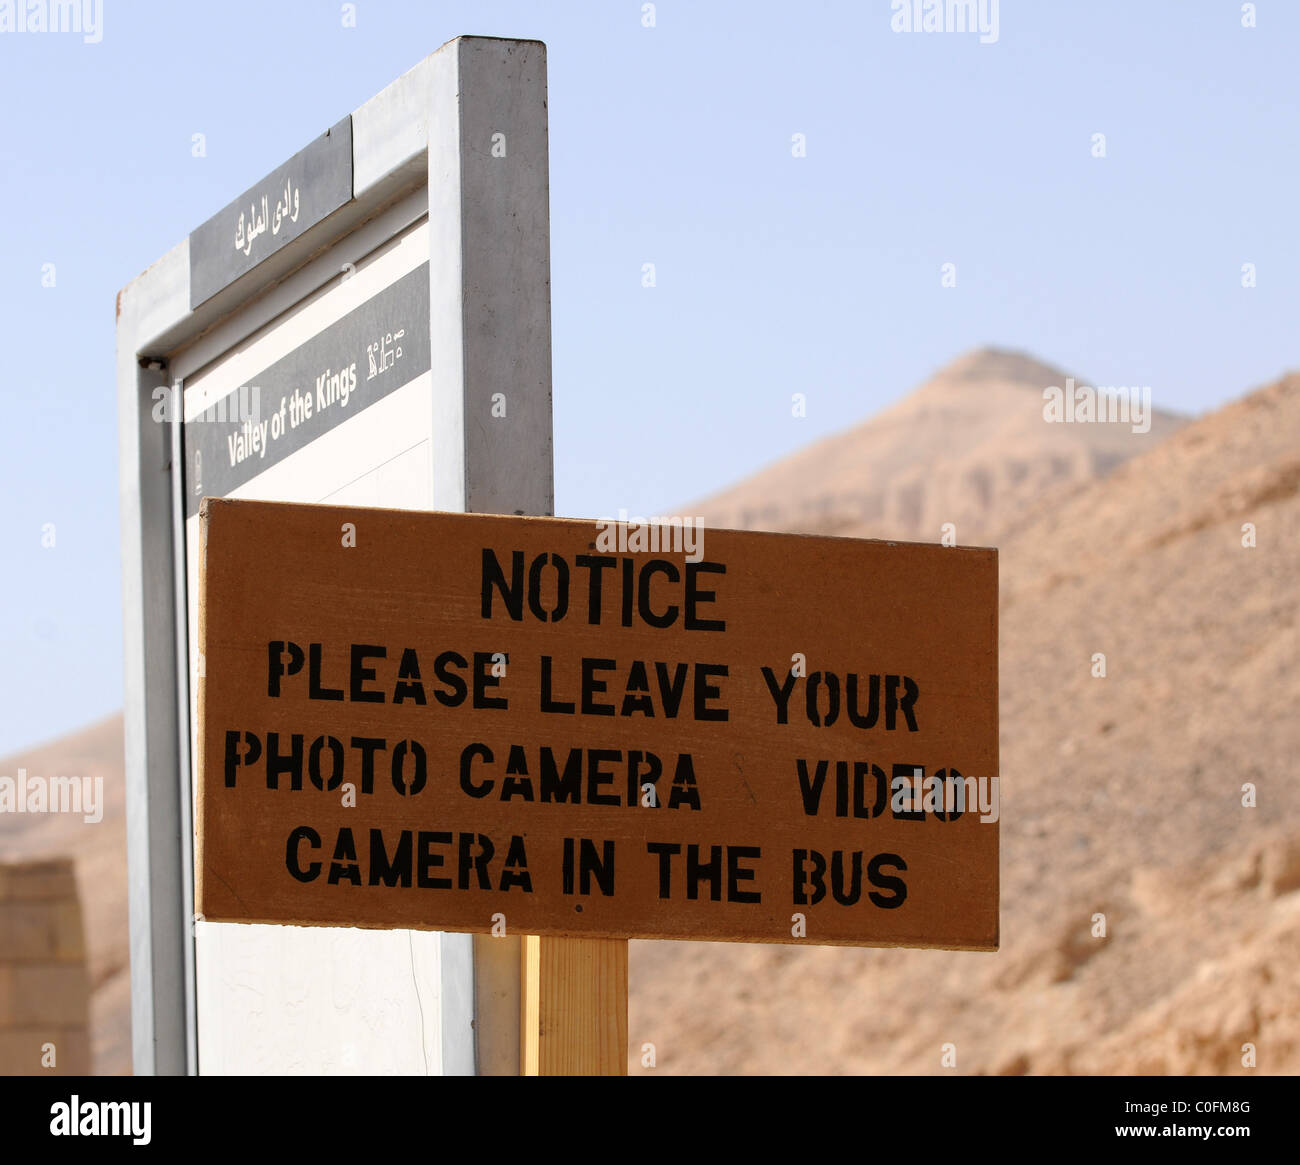 No photography sign at The Valley of the Kings, Egypt Stock Photo